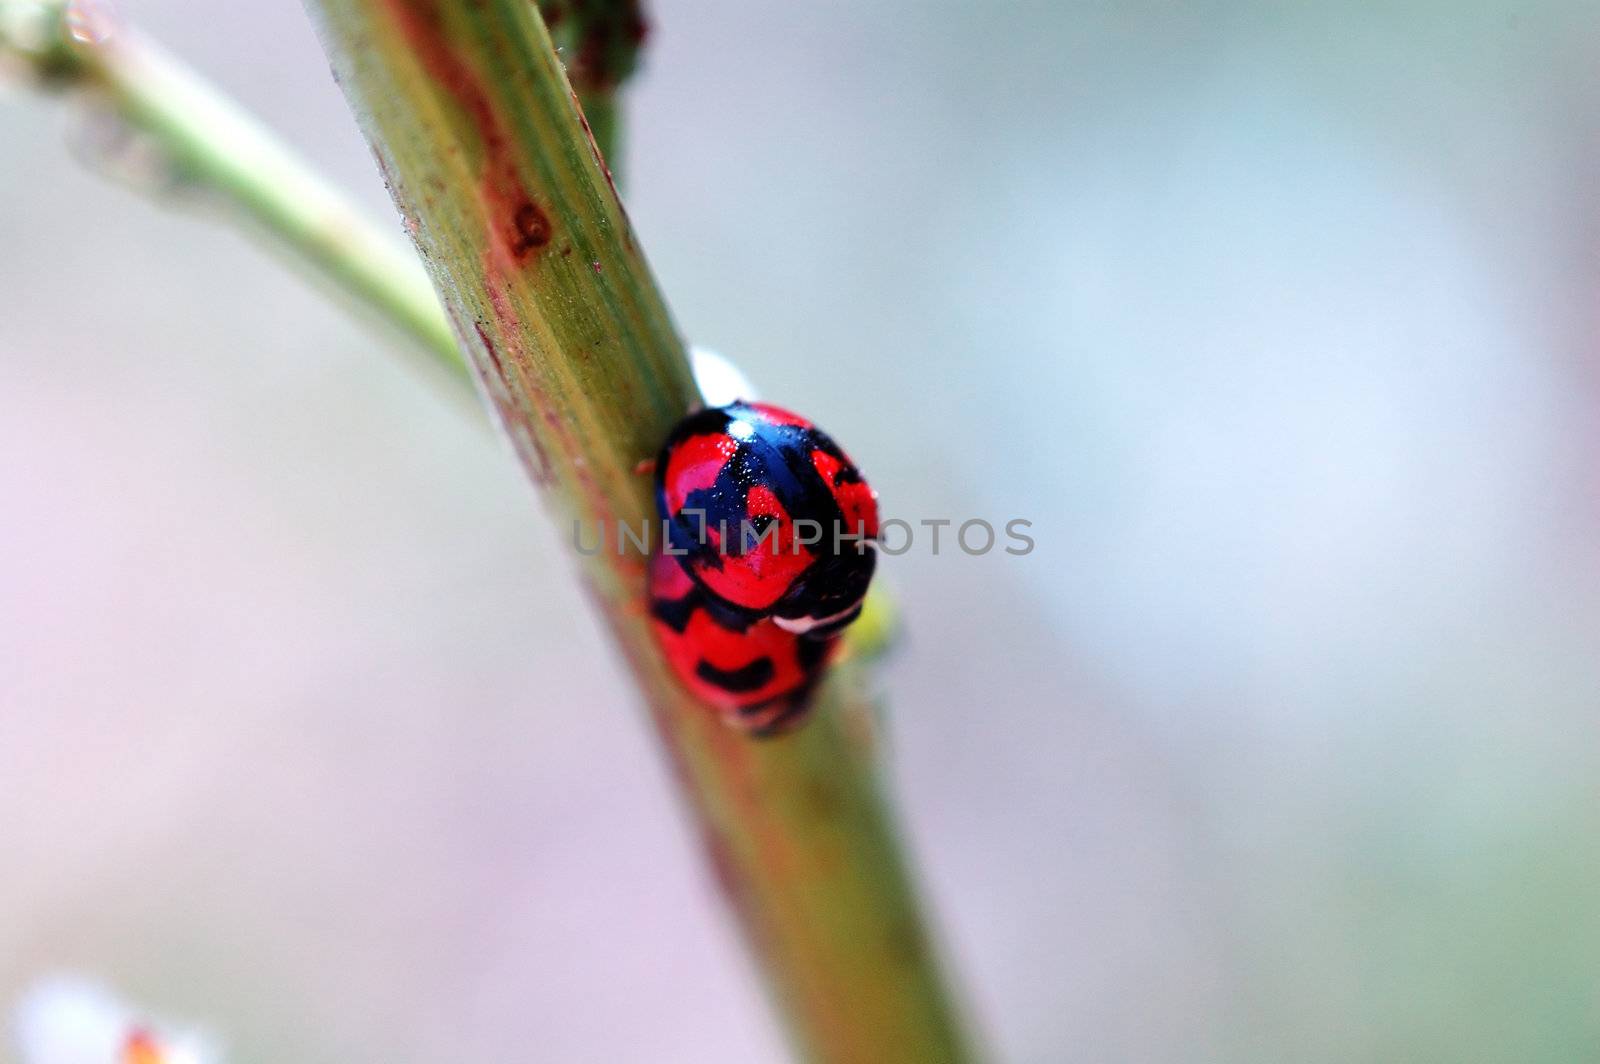 A romantic scene of two mating ladybirds